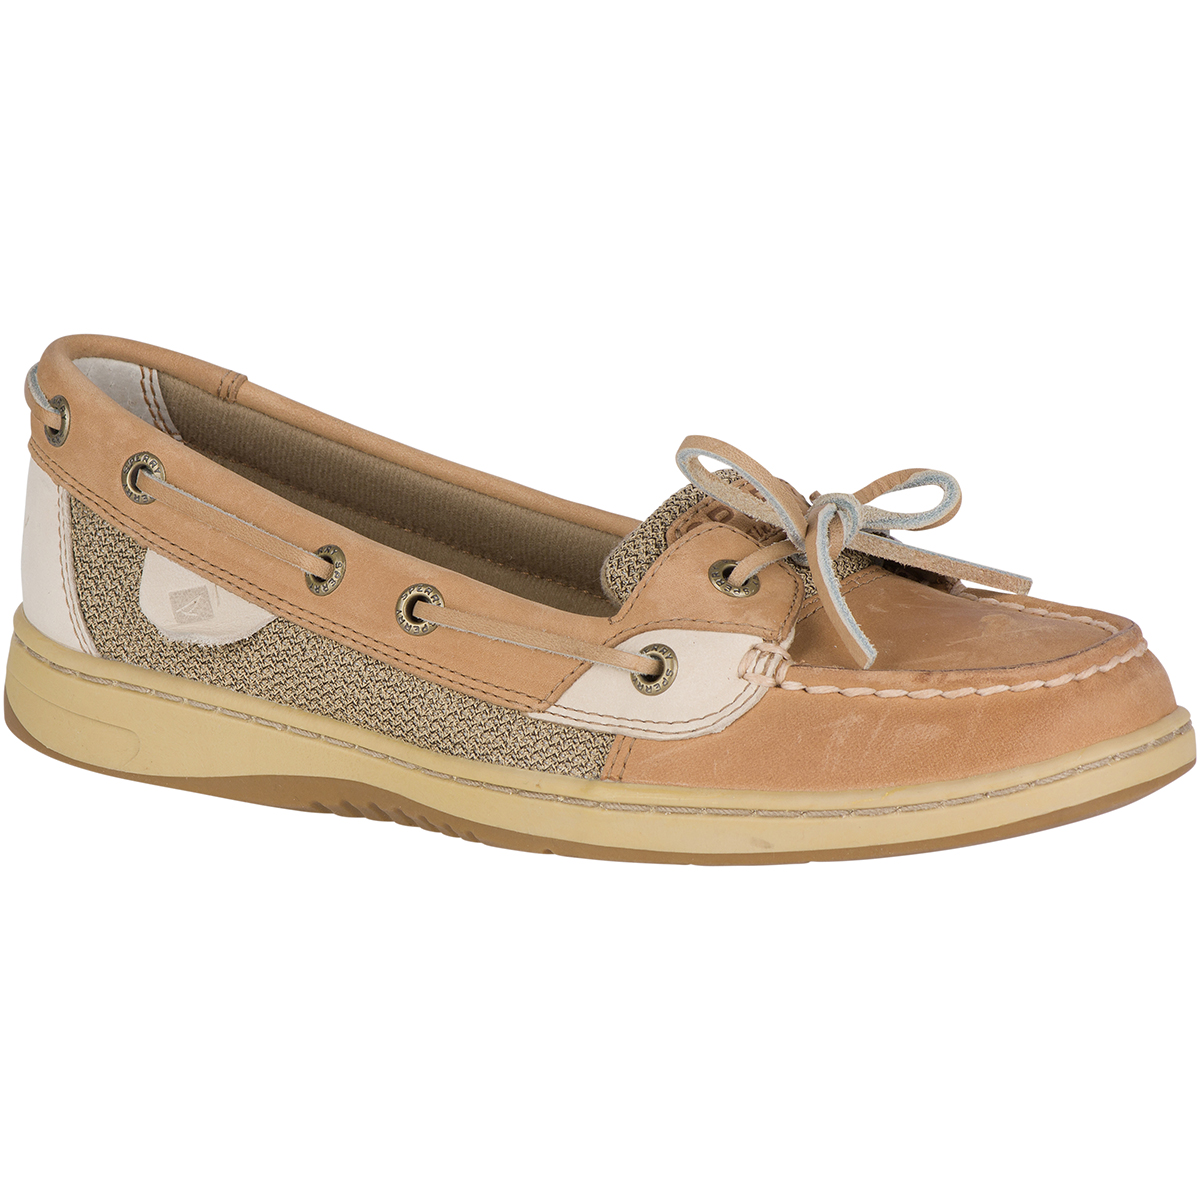 SPERRY Women's Angelfish Boat Shoes 